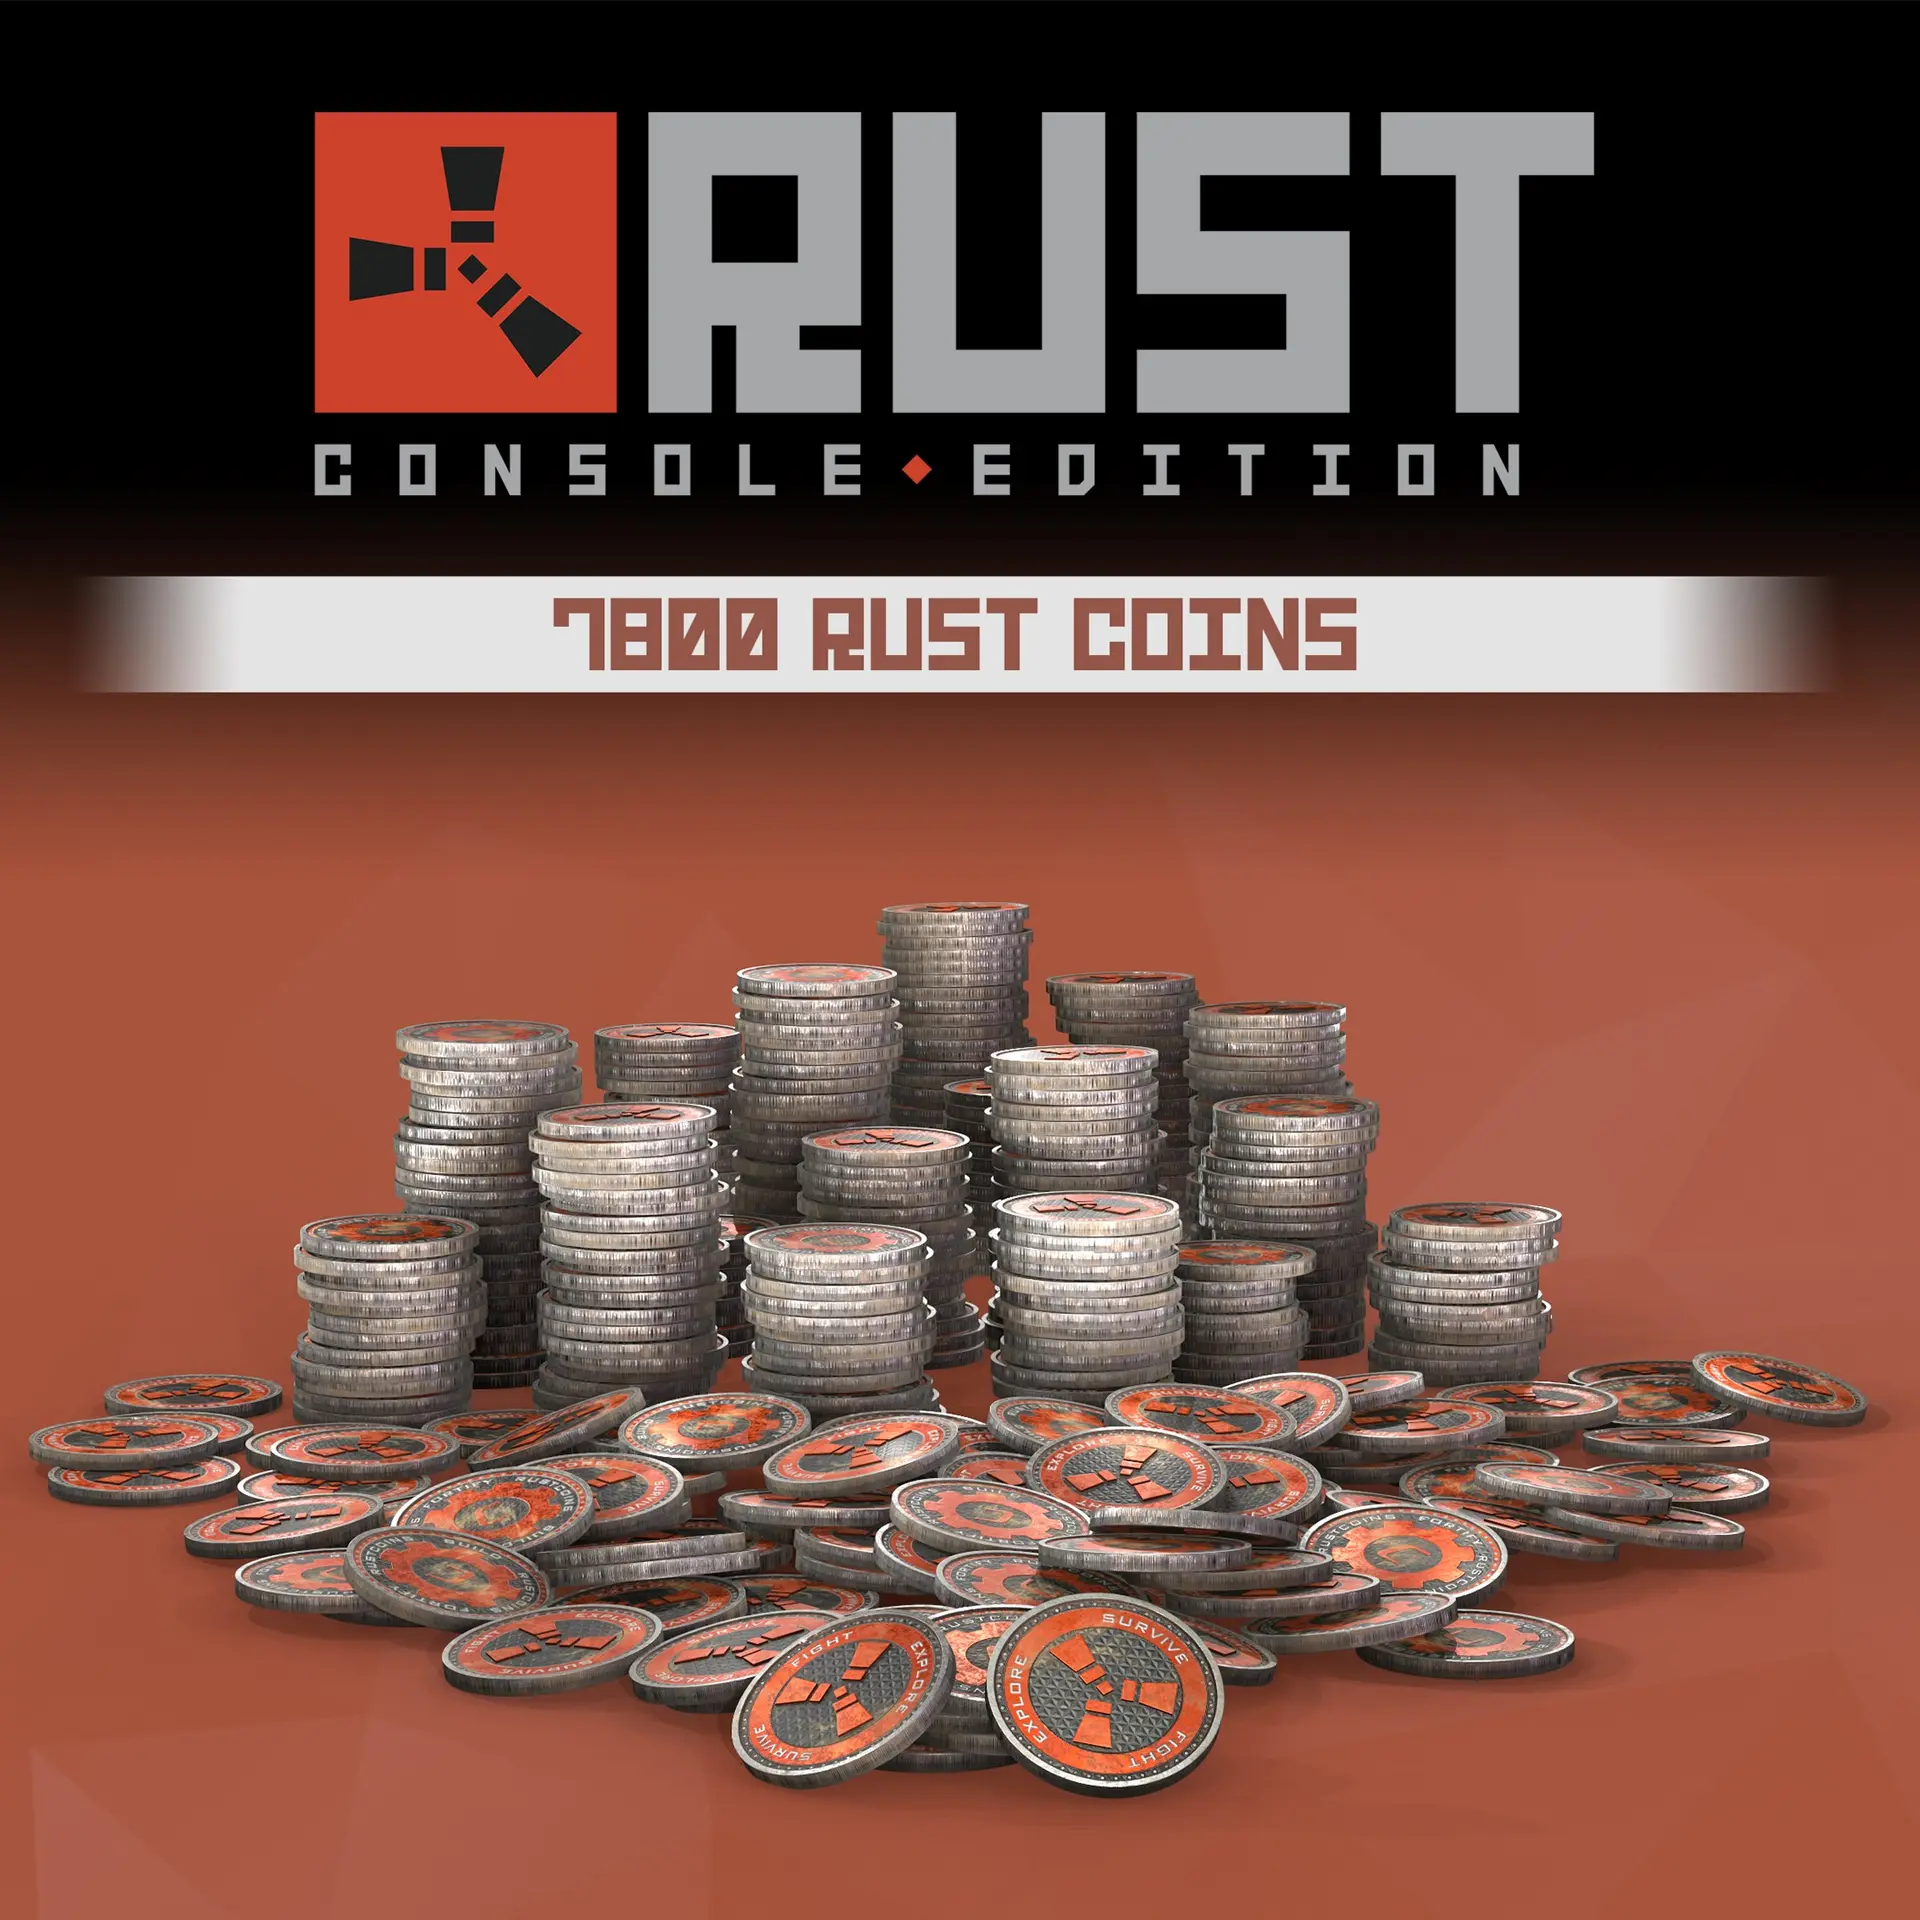 Rust Console Edition - 7800 Rust Coins (XBOX One - Cheapest Store)